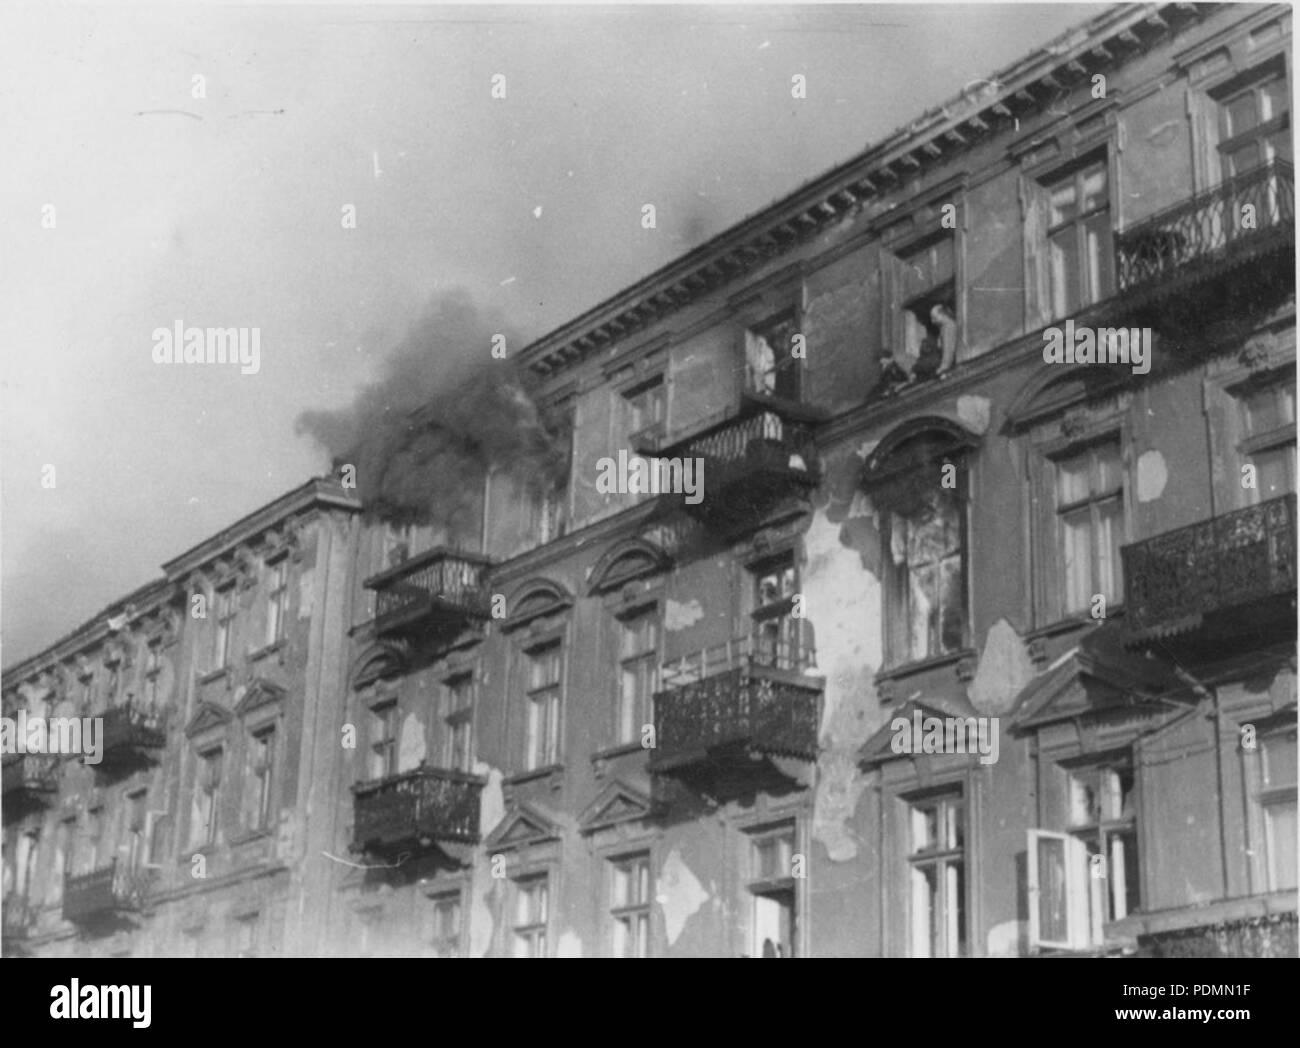 Stroop Report 2/4 Record Group 038 United States Counsel for the Prosecution of Axis Criminality; United States Exhibits, 1933-46 HMS Asset Id: HF1-88454435 ReDiscovery Number: 06315 347 Stroop Report - Warsaw Ghetto Uprising - NARA40a Stock Photo